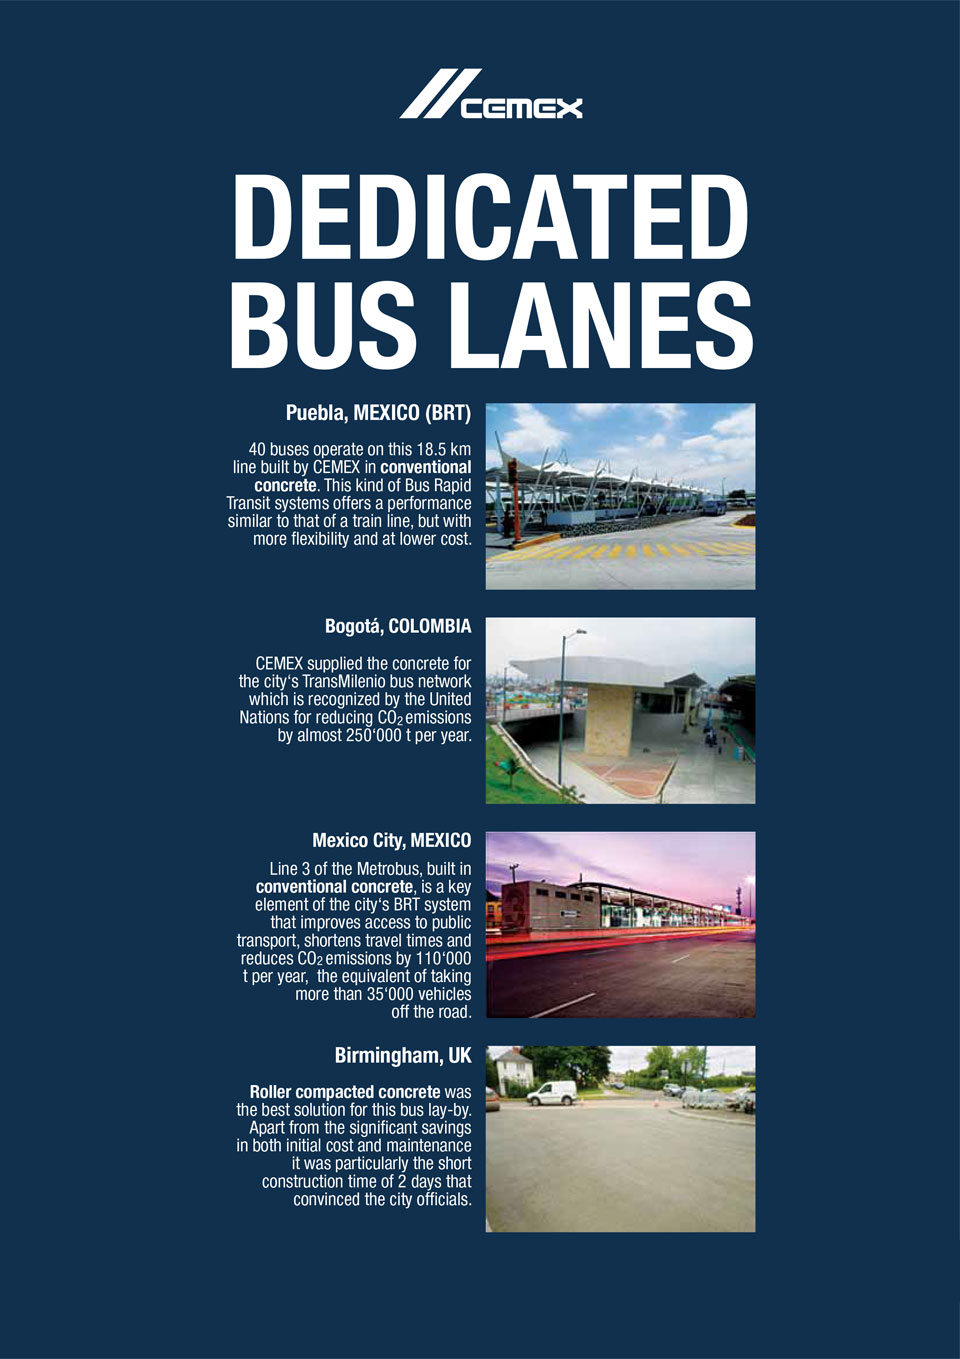 the image shows several bus lanes CEMEX has helped with the construction of